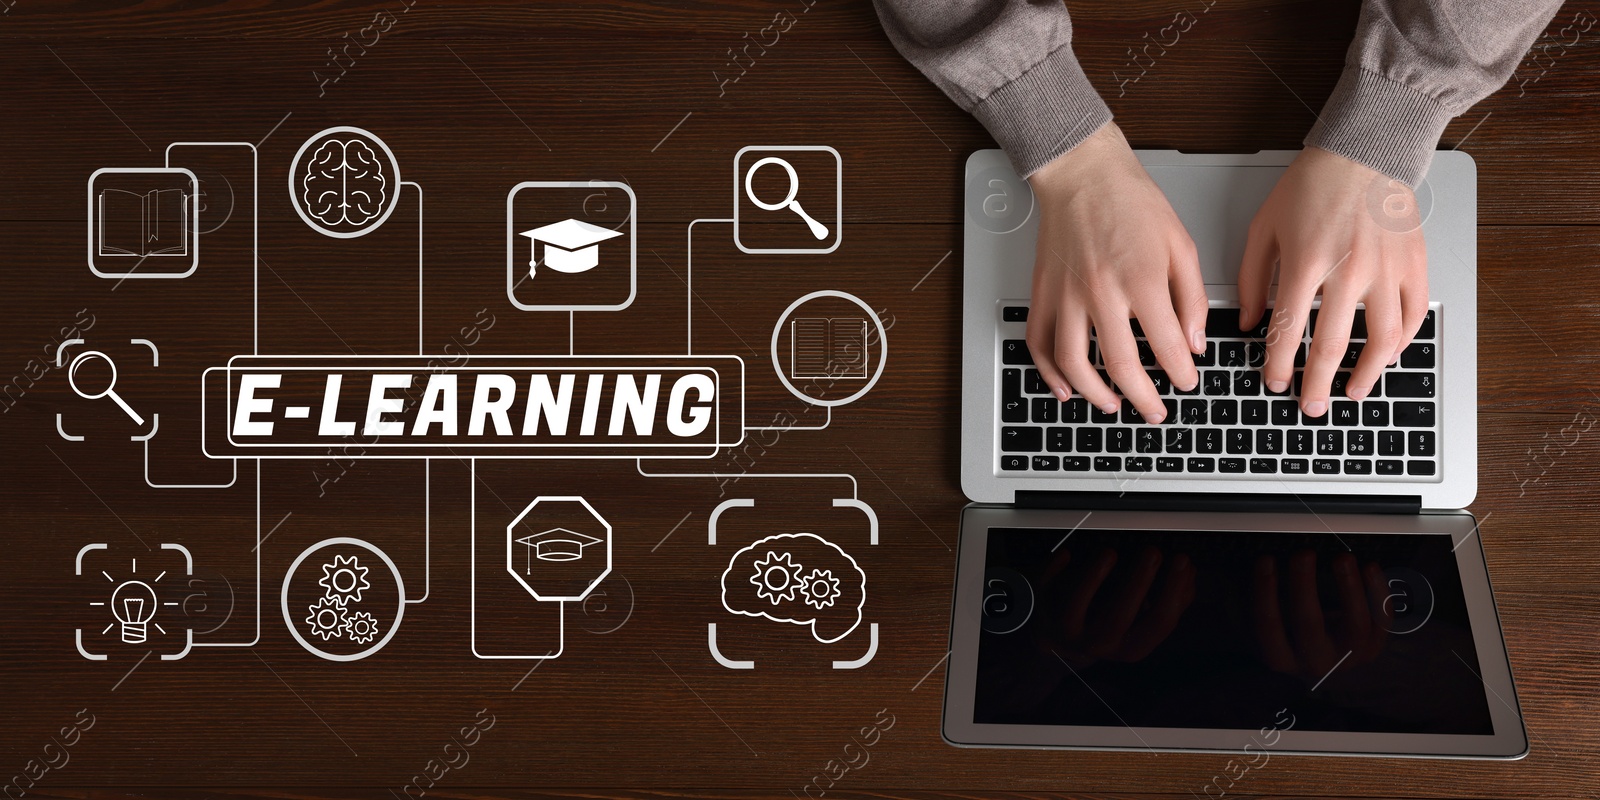 Image of E-learning, banner design. Man working with laptop at wooden table, top view. Illustration of scheme with different icons